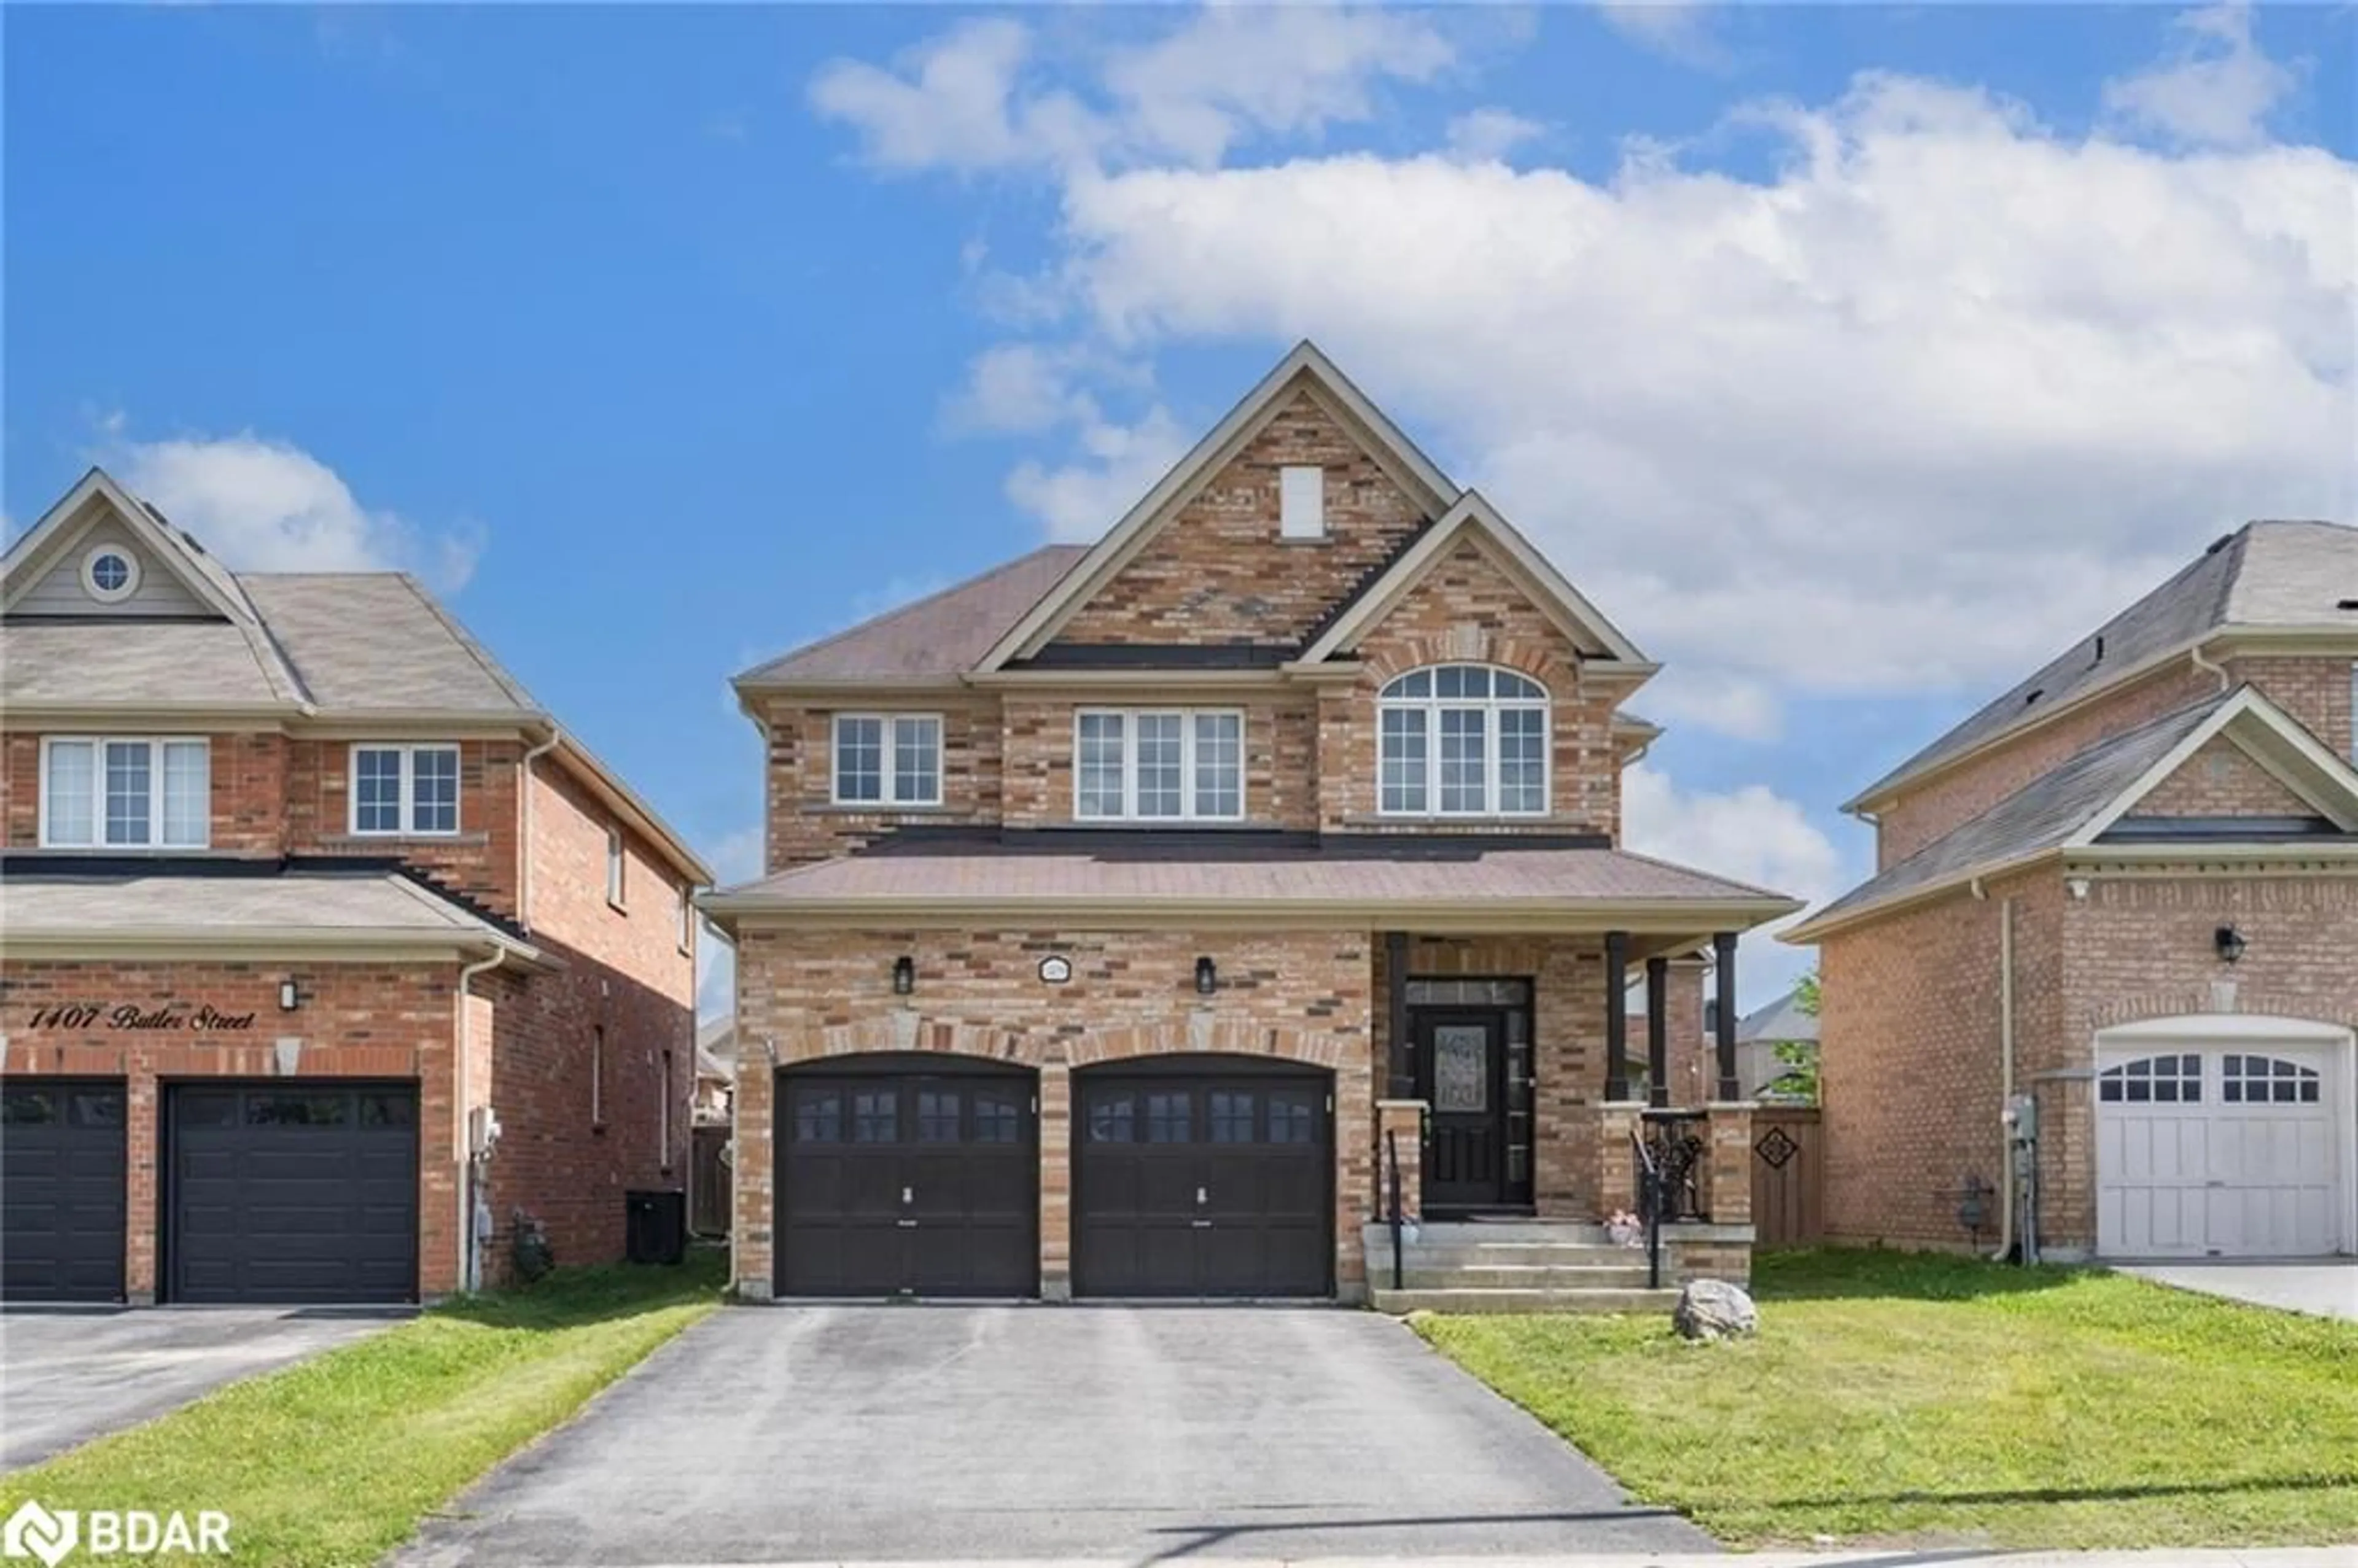 Home with brick exterior material for 1409 Butler St, Innisfil Ontario L9S 0H3